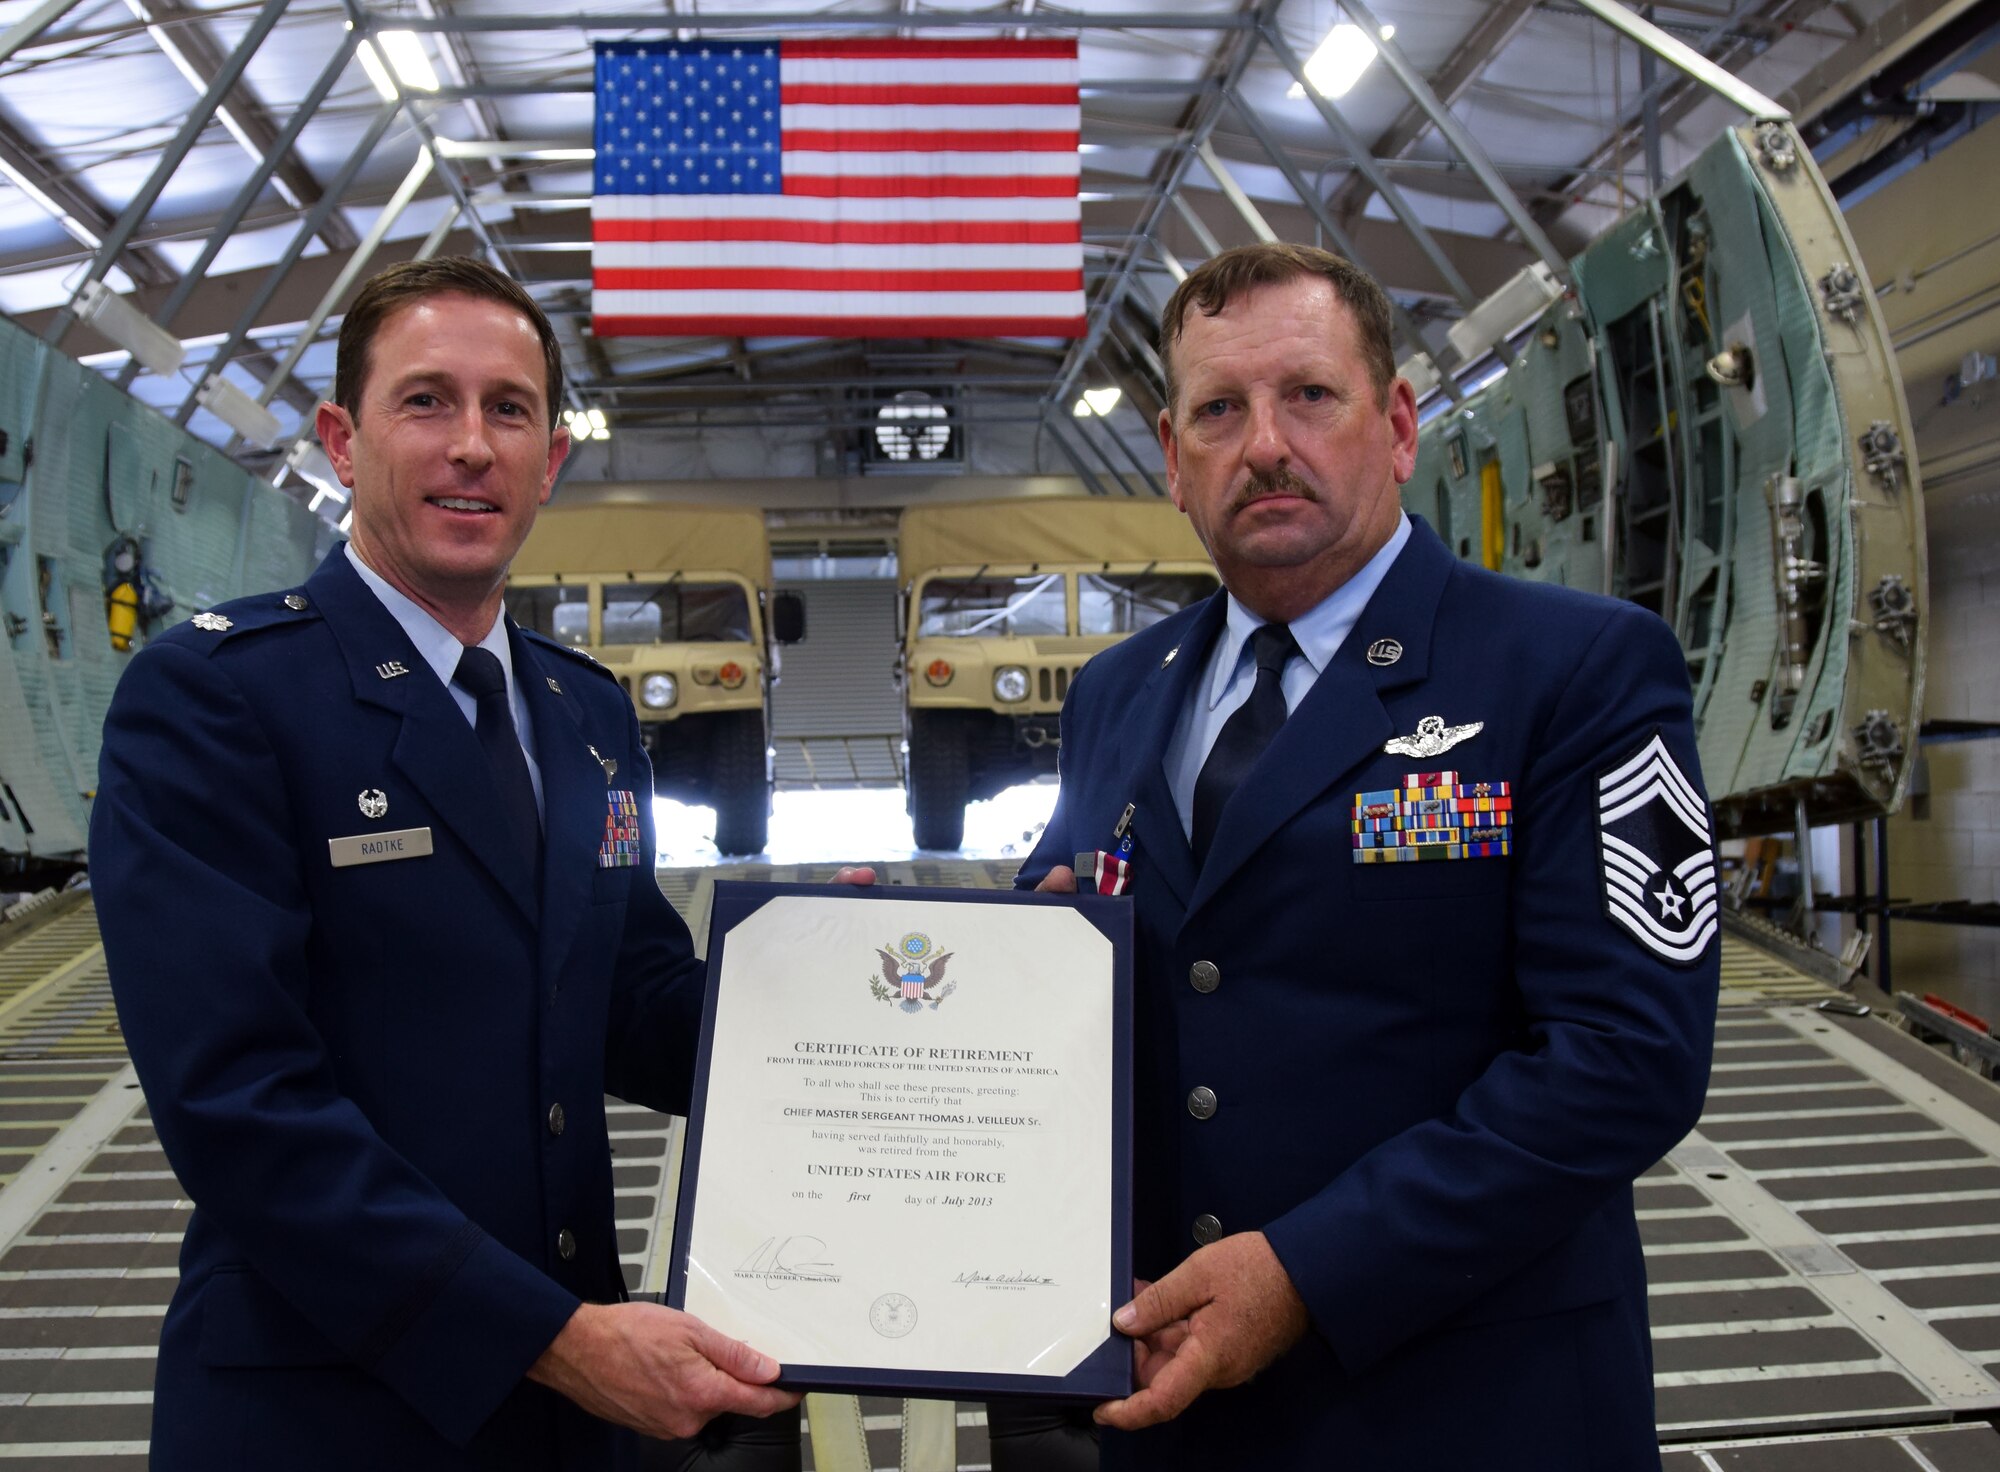 Lt. Col. Steven Radtke, 356th Airlift Squadron commander, presents the retirement certificate to Chief Master Sgt. Thomas J. Veilleux Sr., 356th Airlift Squadron’s Formal Training Unit superintendent, at the Cargo Loading Training Facility at Joint Base San Antonio-Lackland, Texas June 11, 2017. (U.S. Air Force photo by Tech. Sgt. Carlos J. Trevino)